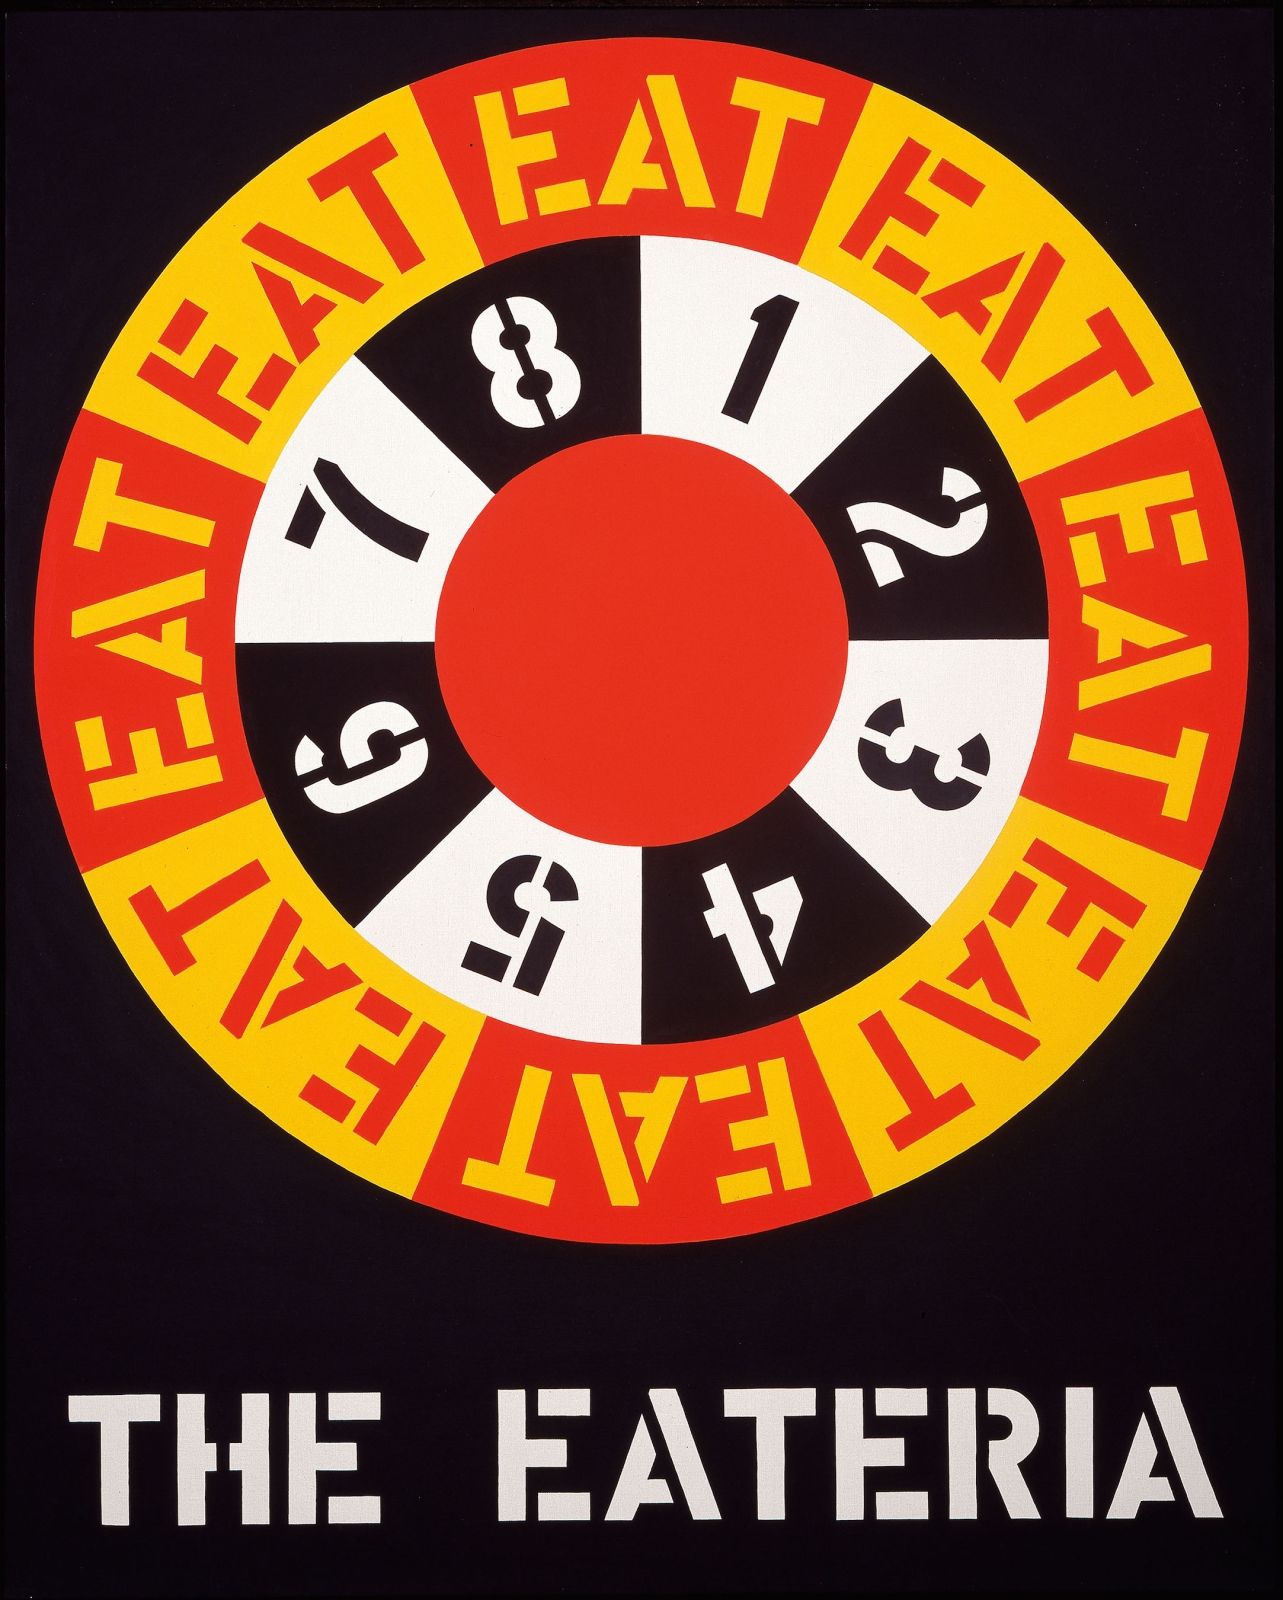 The Eateria, 1962.&amp;nbsp;Photo: Courtesy of the Hirshhorn Museum and Sculpture Garden, Smithsonian Institution, Washington, D.C.; Artwork: &amp;copy; Morgan Art Foundation Ltd./Artists Rights Society (ARS), NY